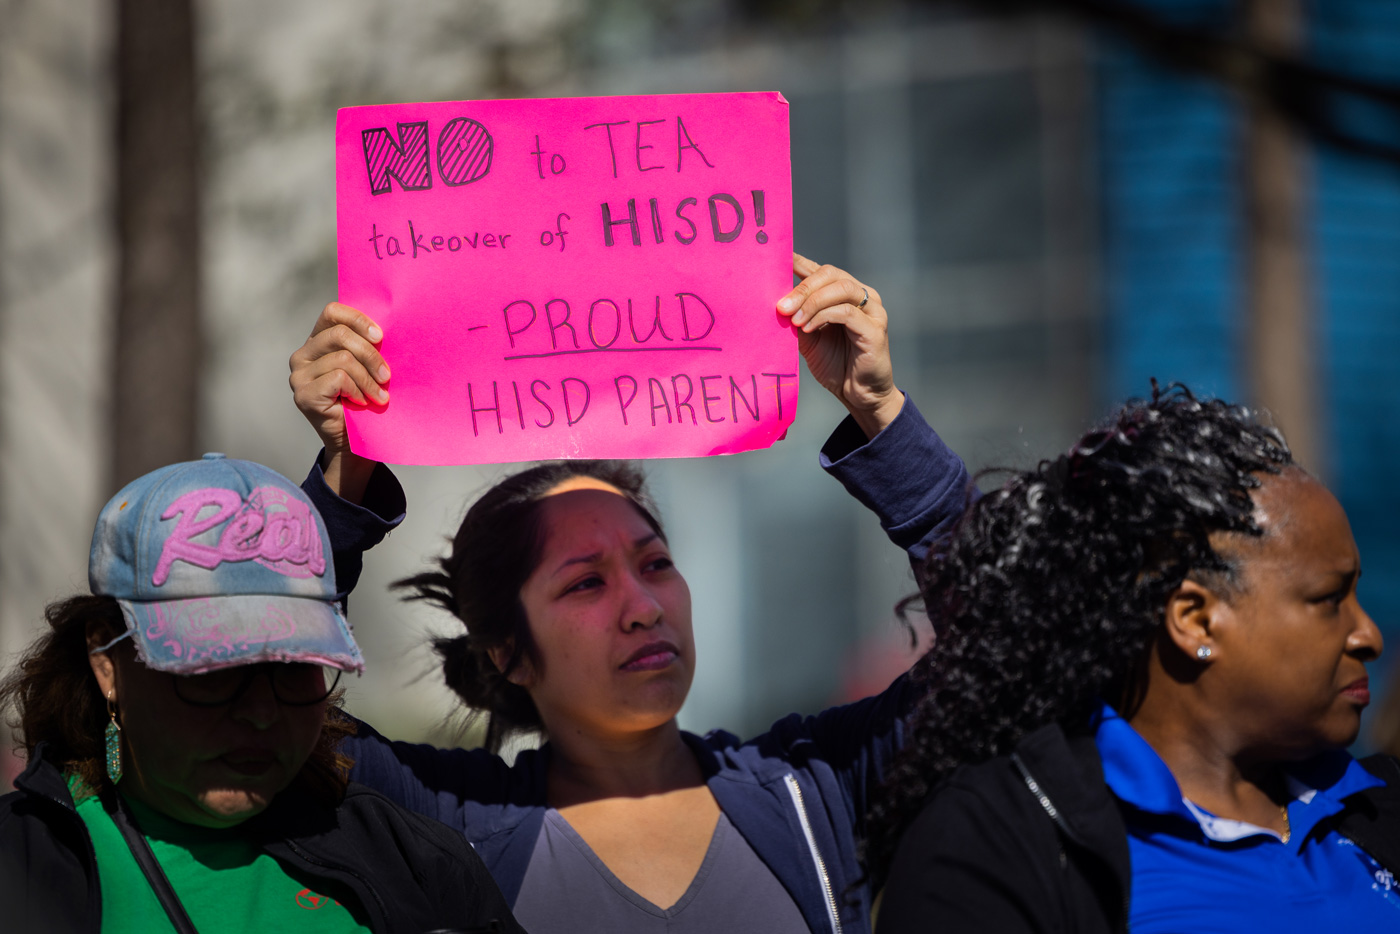 Parent holds a sign during a protest.